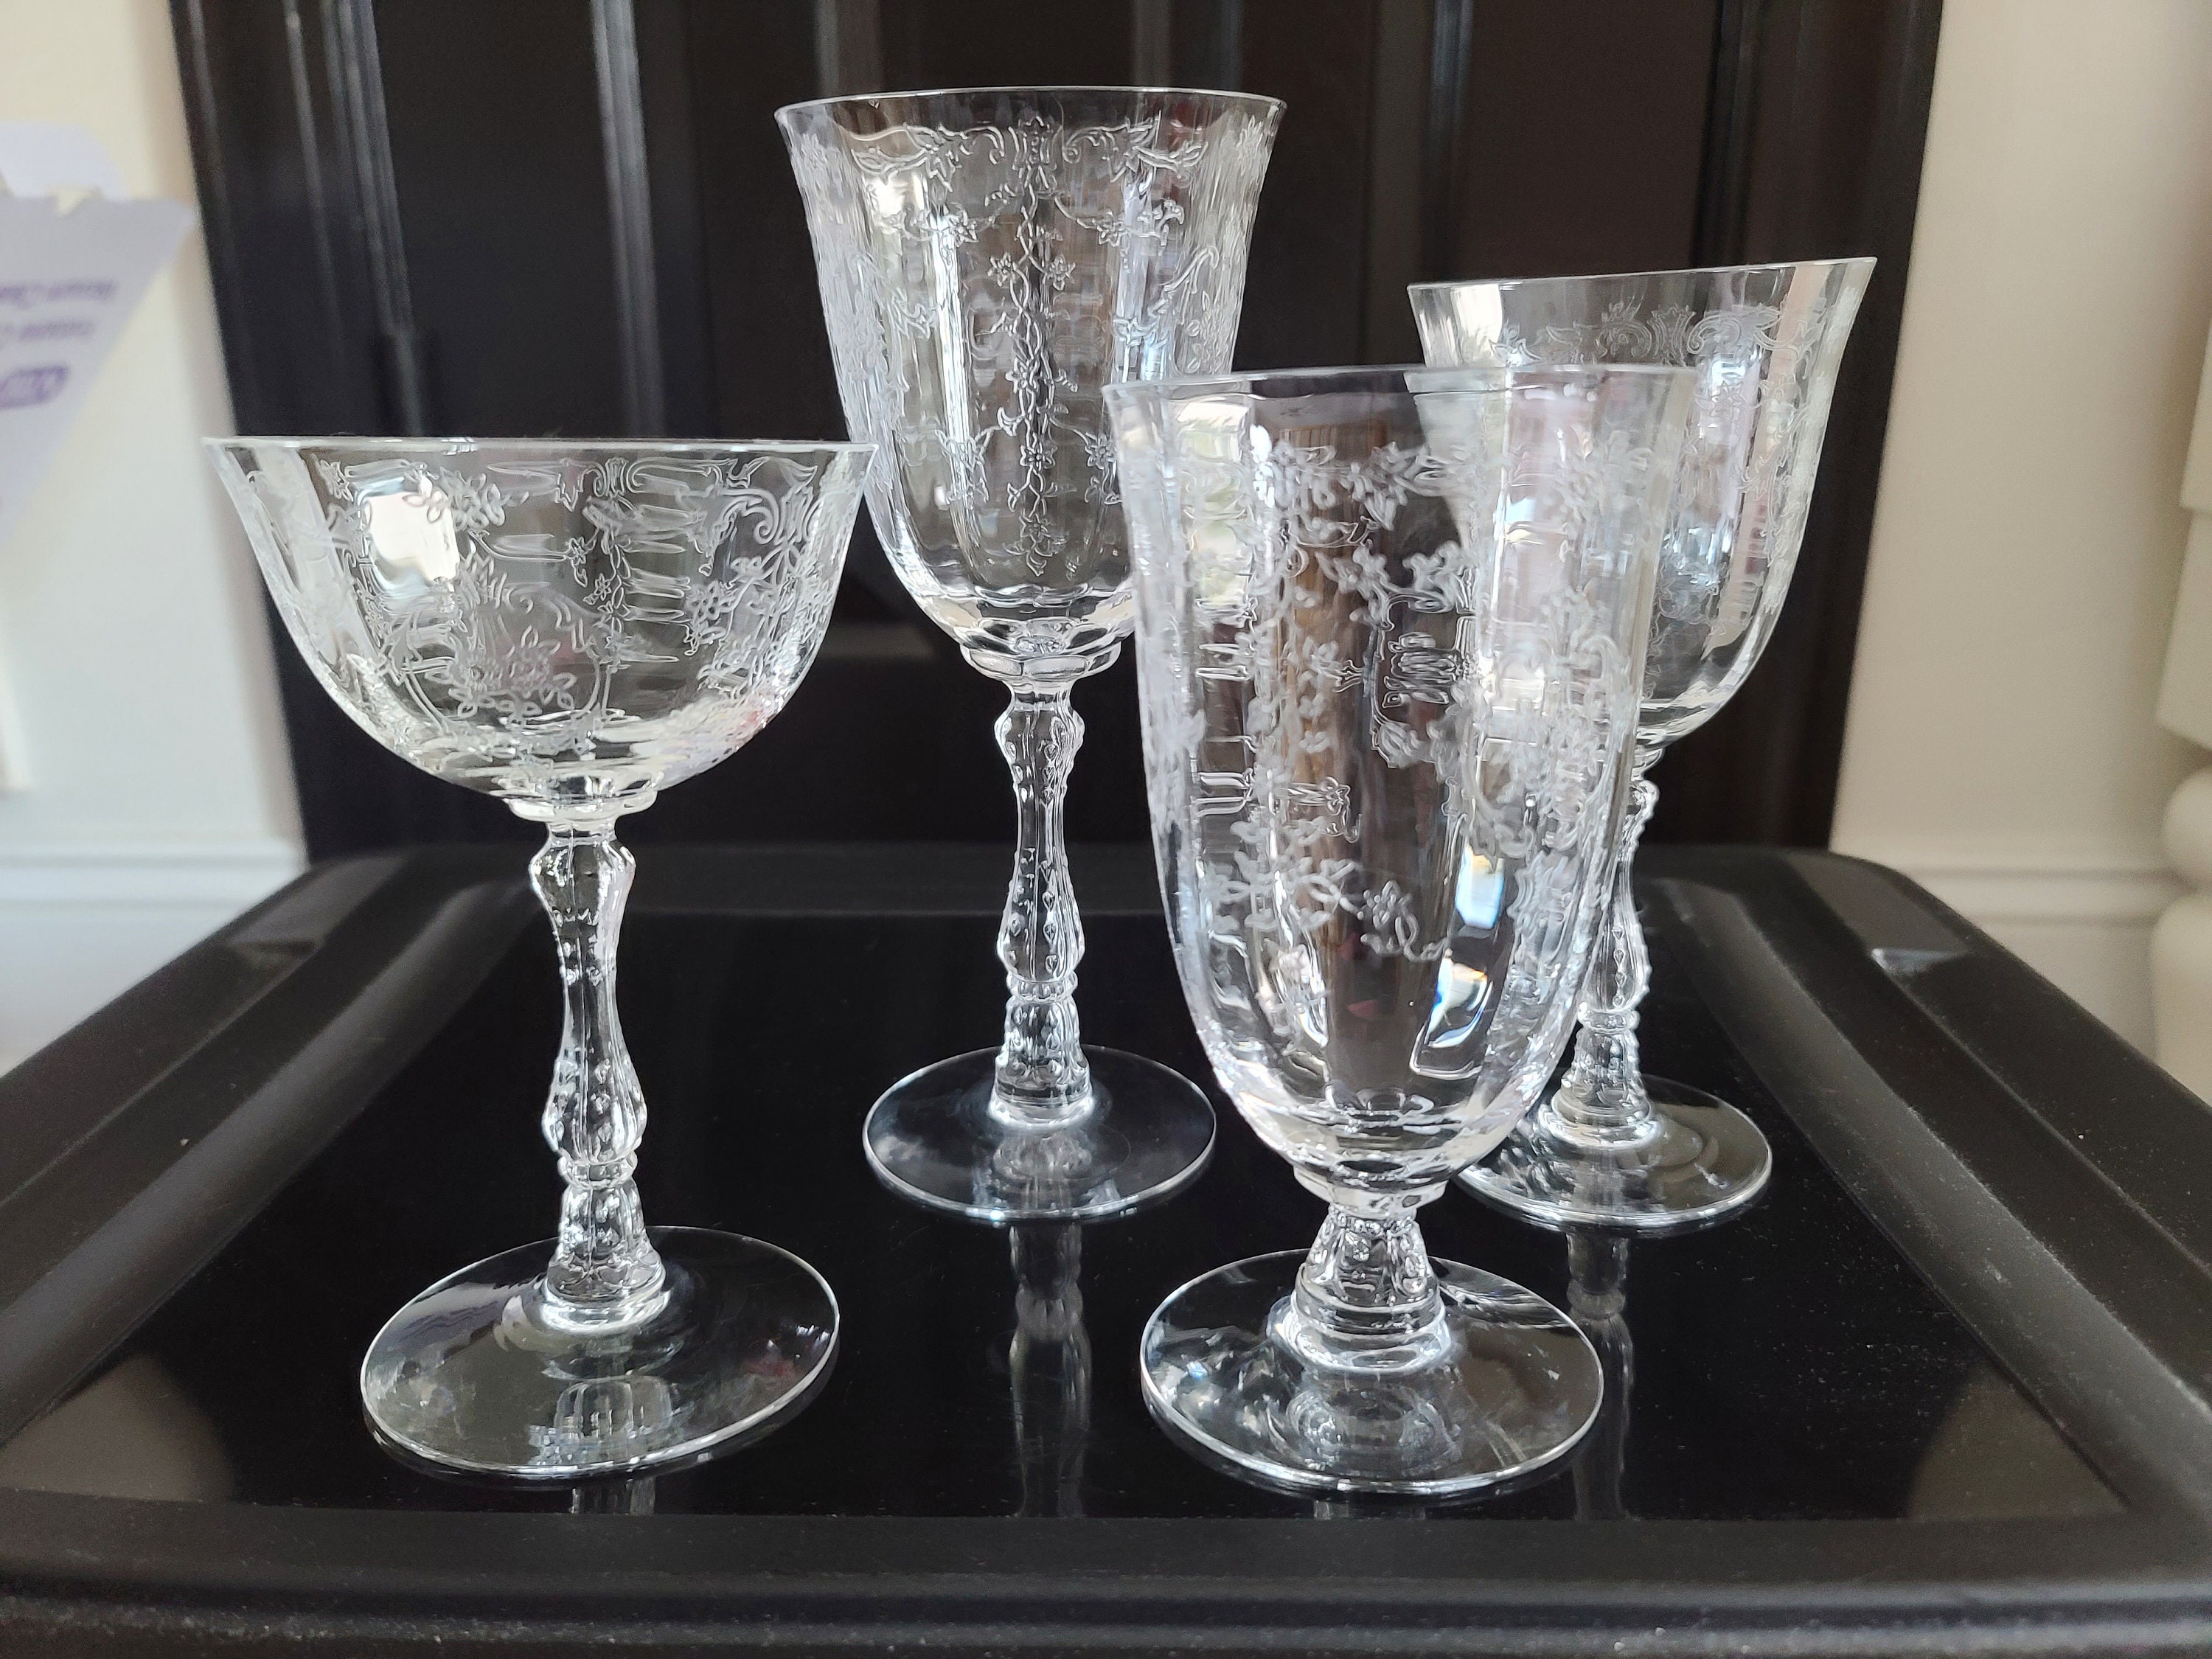 4 Crate & Barrel Nora” Goblet Wine/ Water Glass Stems 9.5 2005-12  discontinued